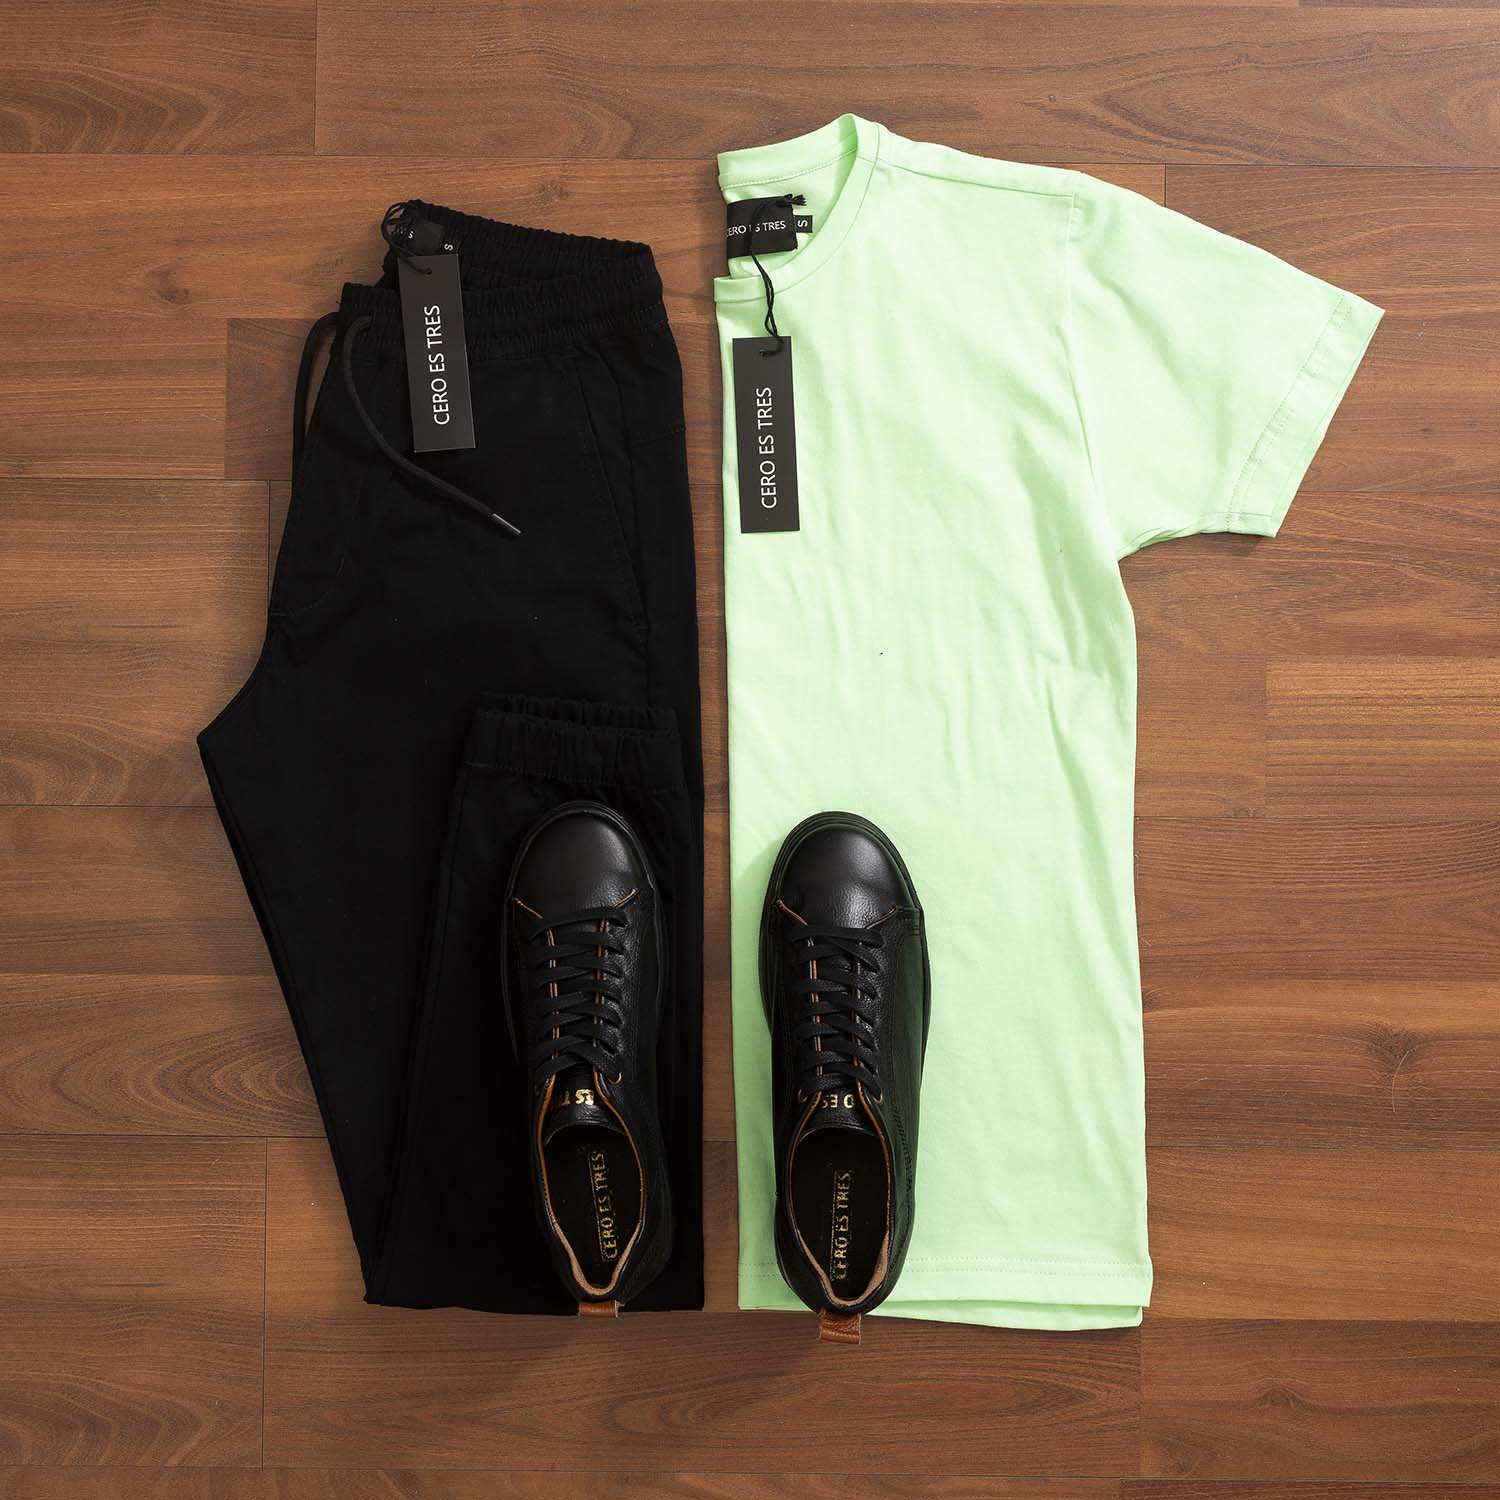 OUTFIT CERO 465